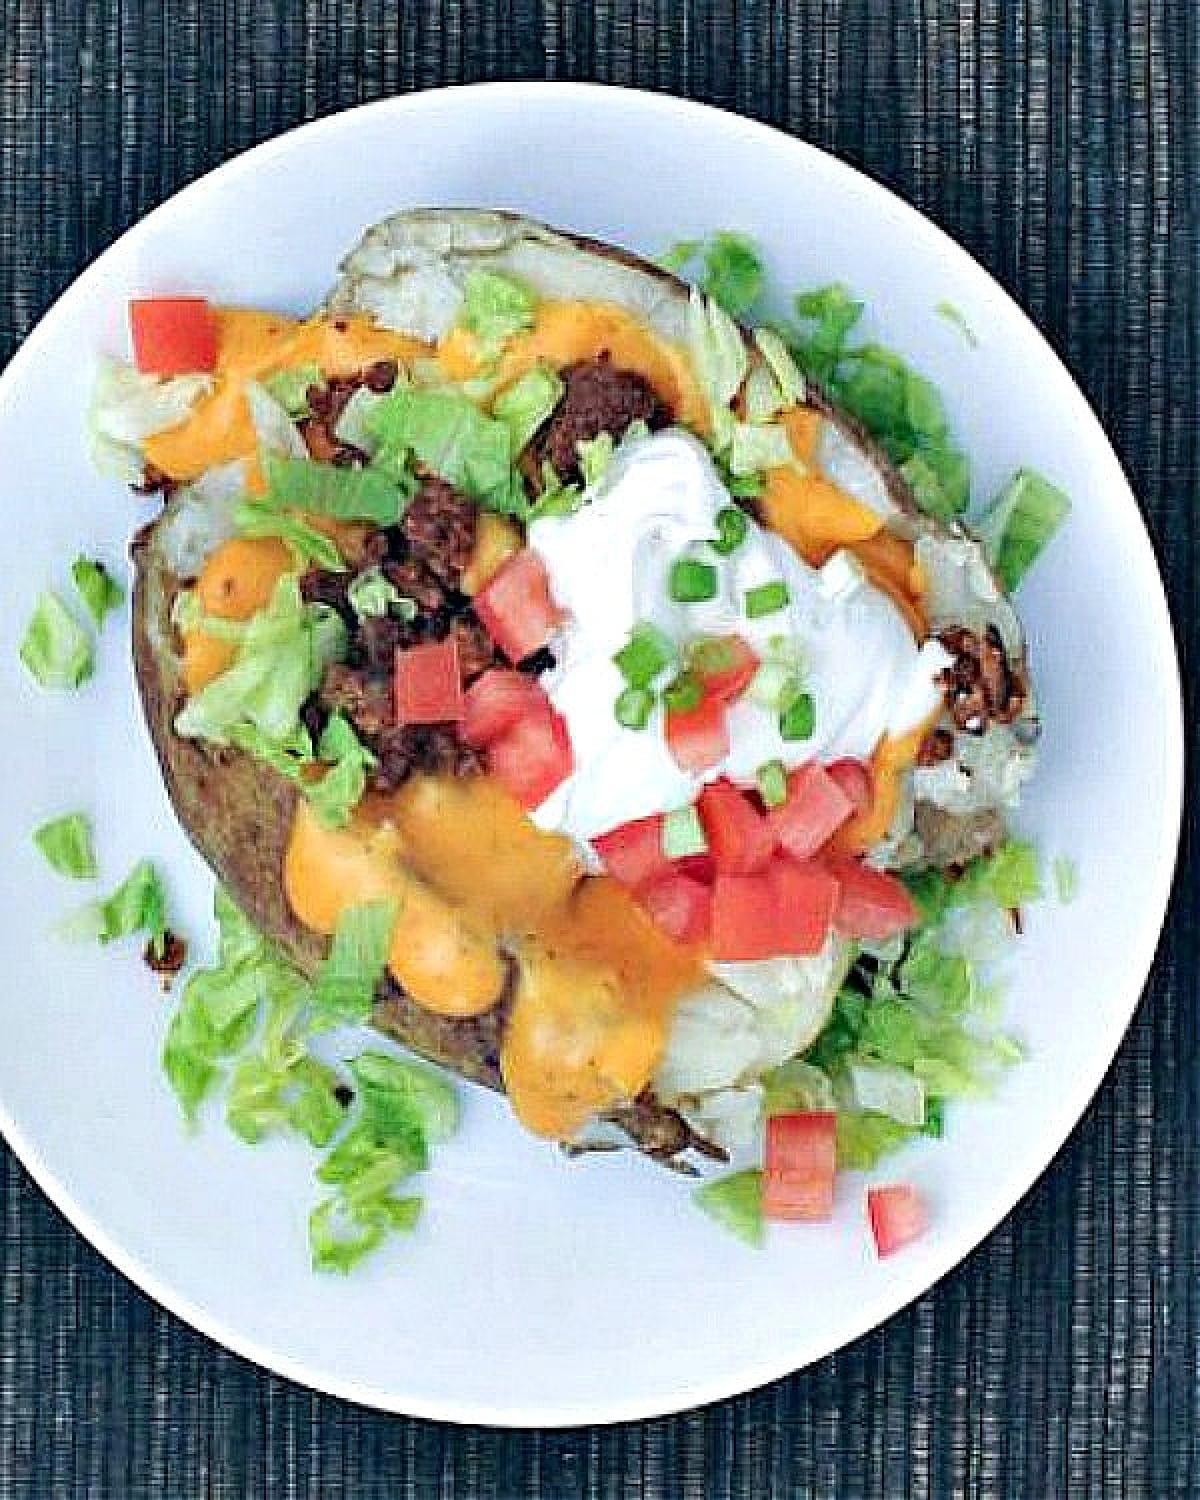 Overhead view of vegan ground beef in a taco baked potato, with shredded lettuce, diced tomato, sour cream, green onion, and cheese sauce.